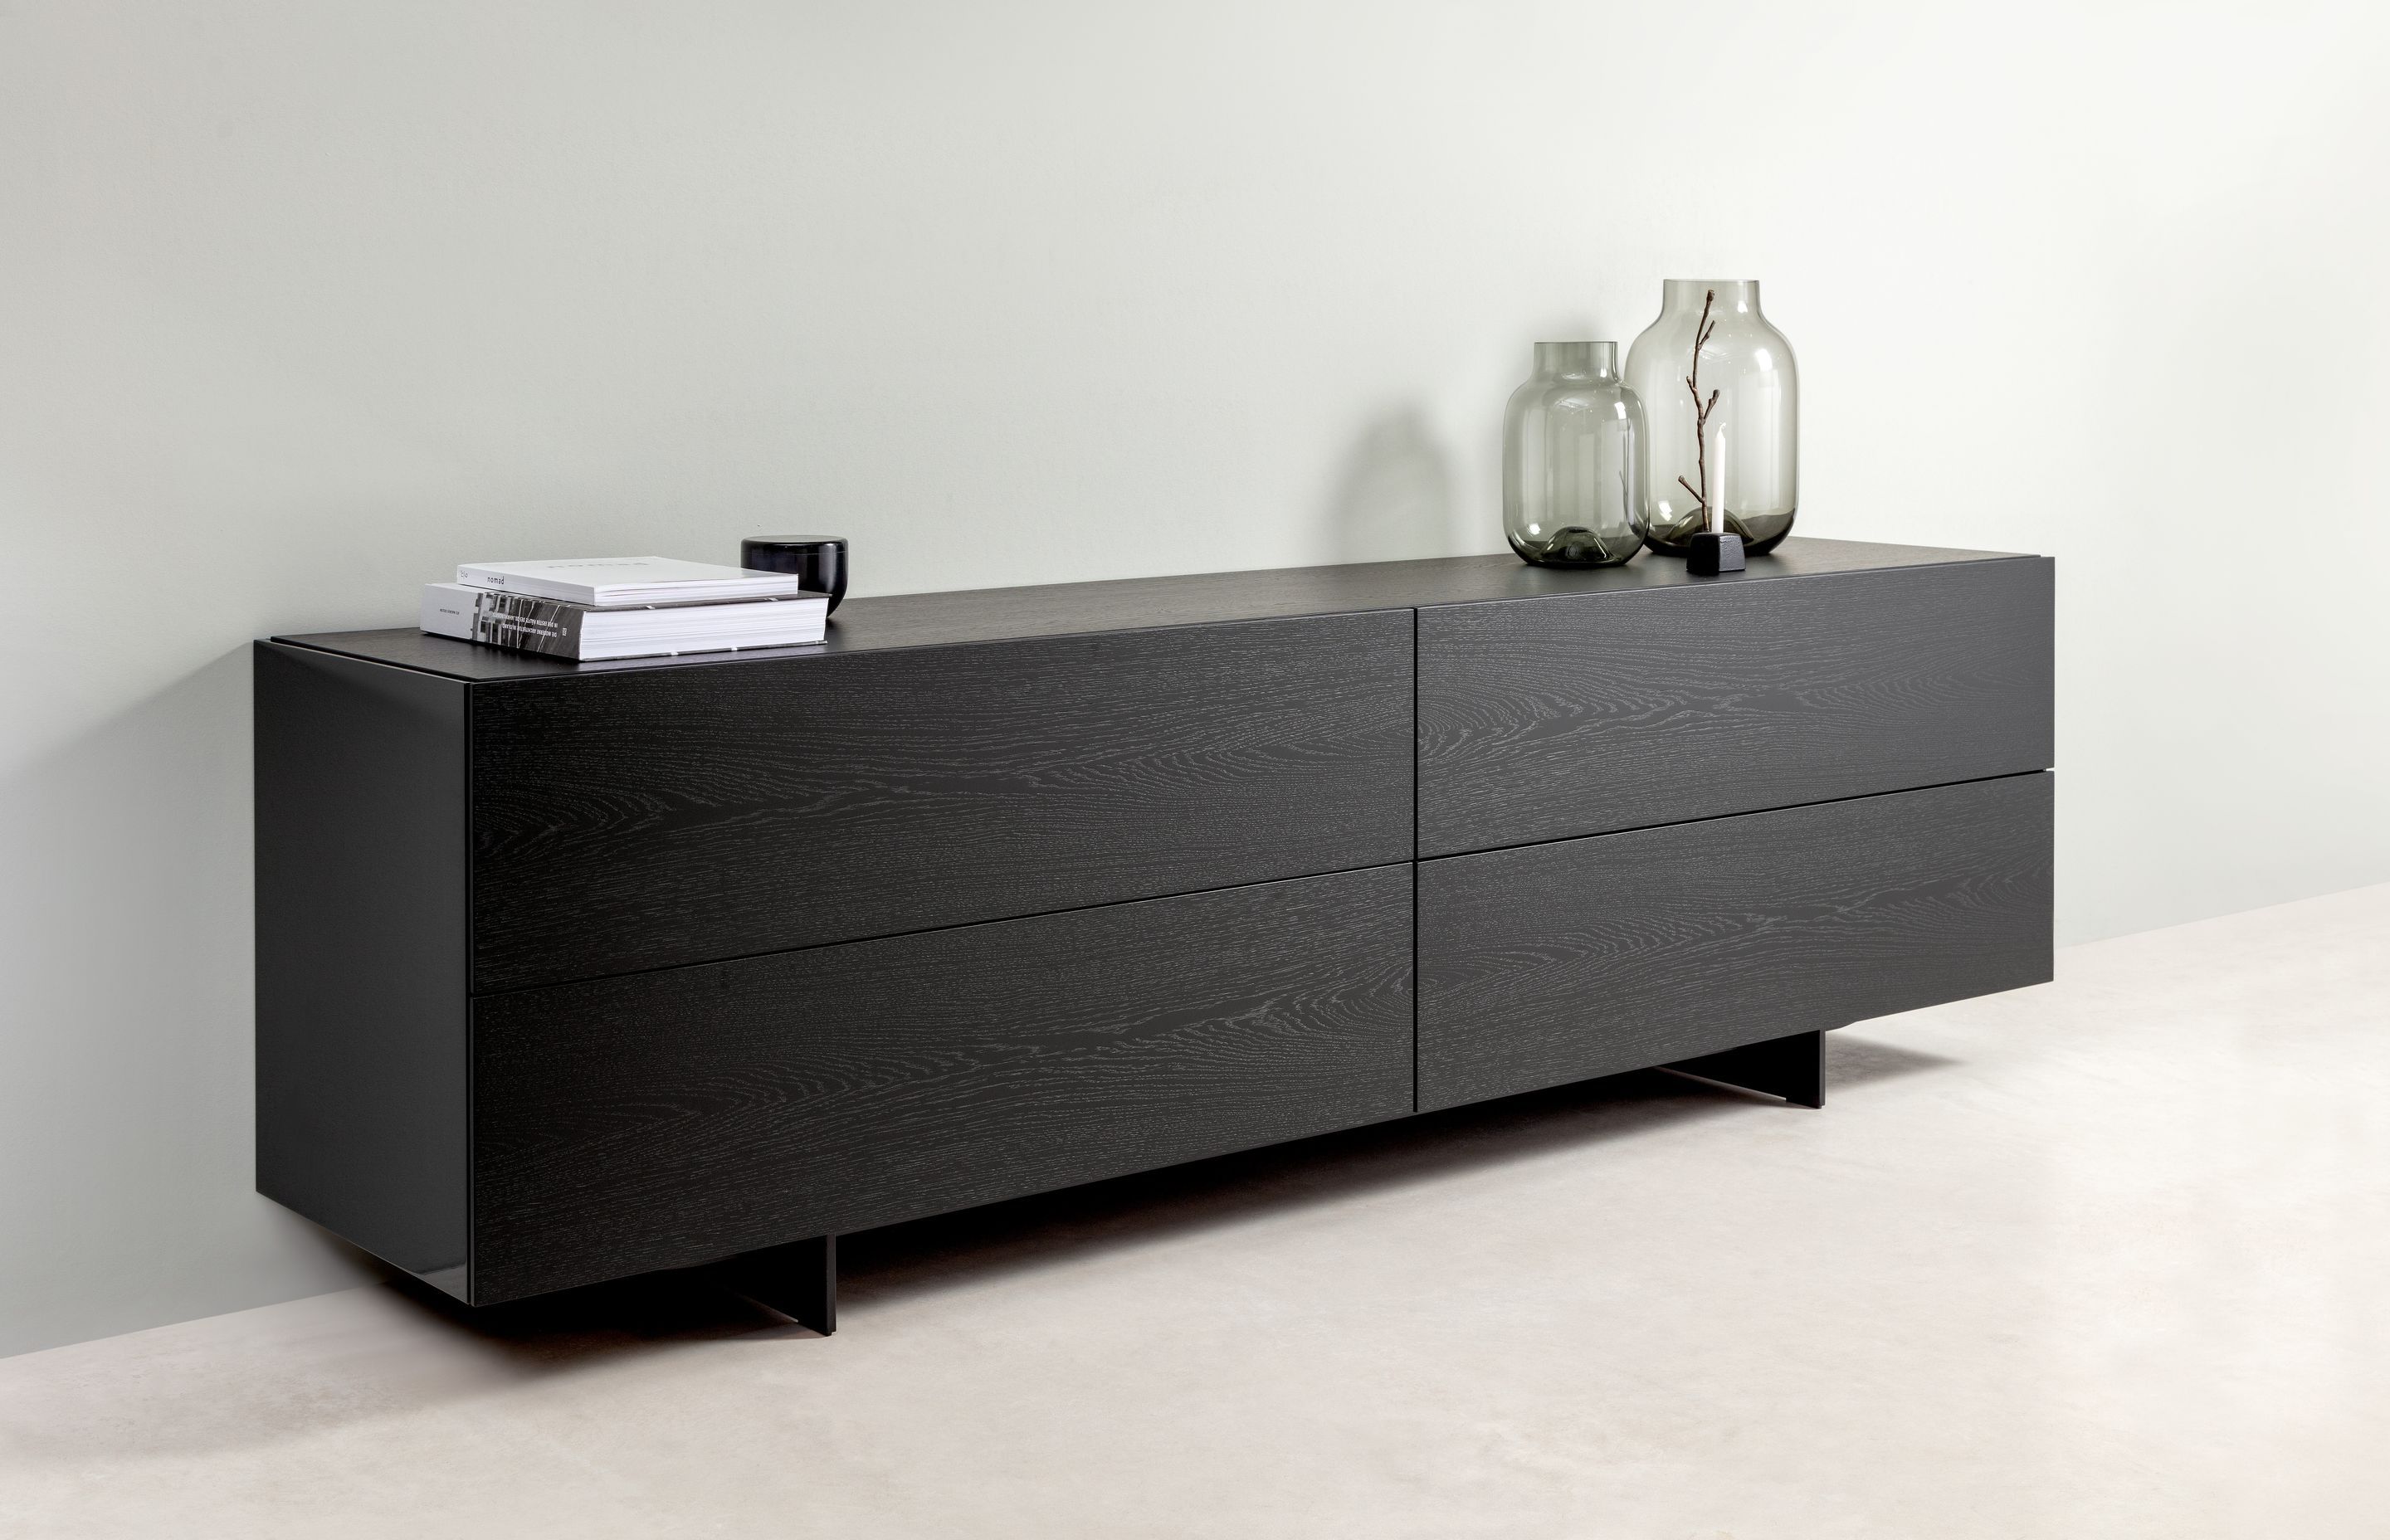 The Rolf Benz Stretto cabinet system brings order to every living space and comprises fully customisable lowboys, sideboards, highboys, a media console, a bedside table, wardrobes and open elements.